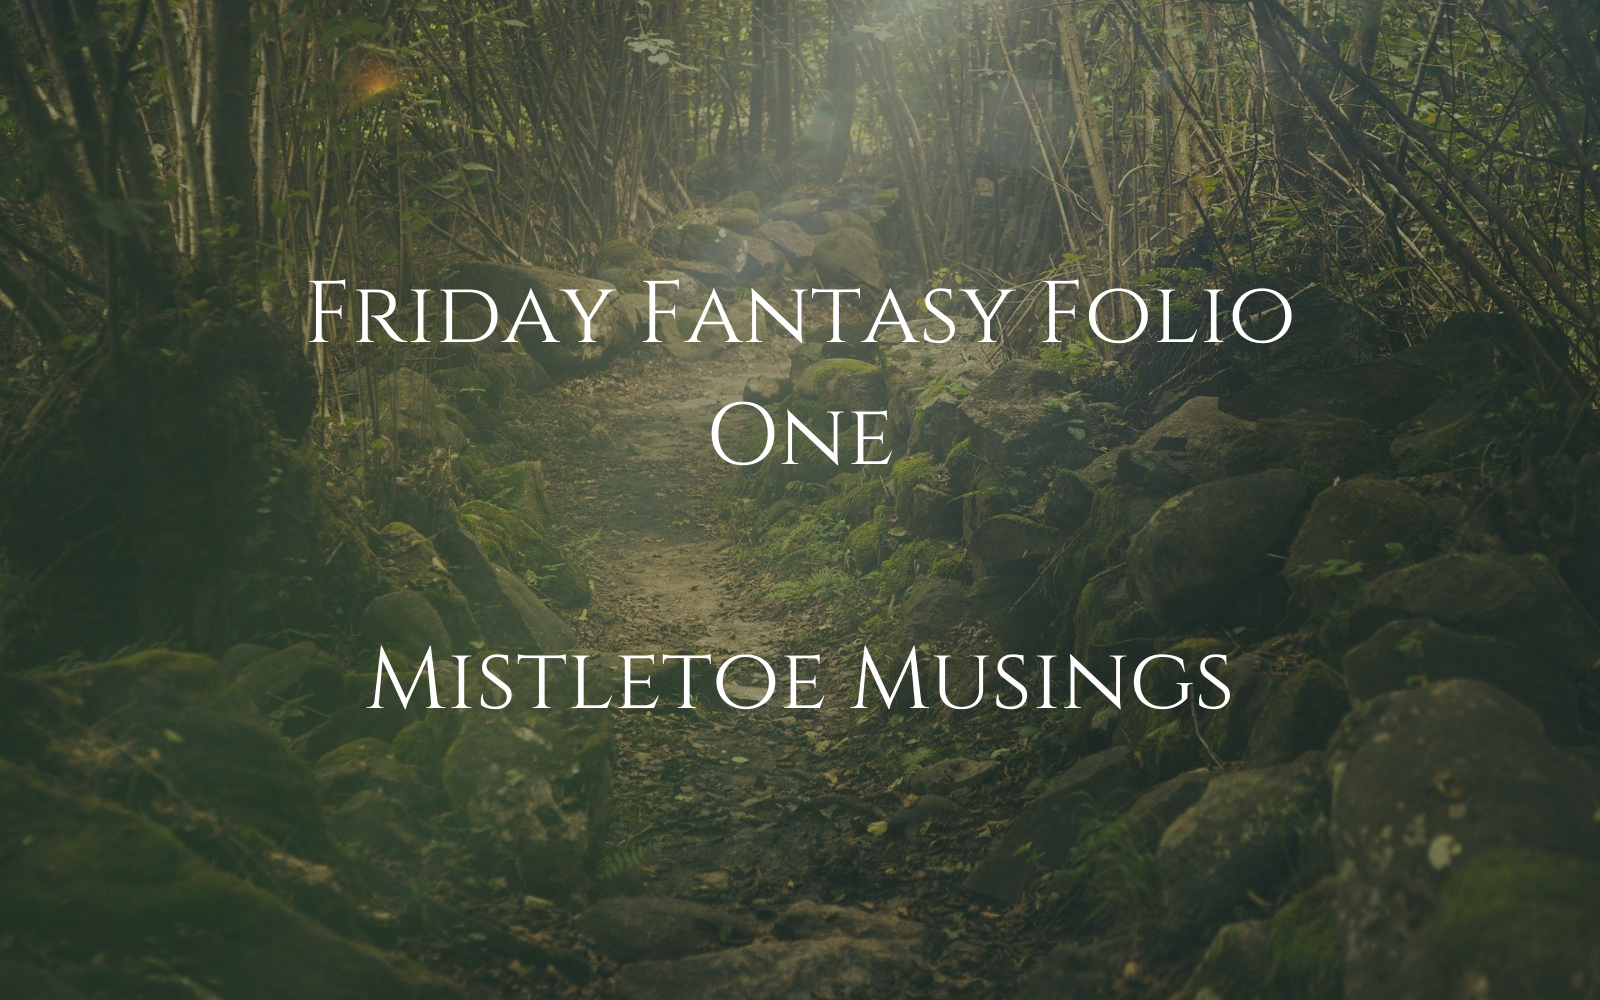 picture of a path through the woods with text overlay that reads Friday Fantasy Folio One, Mistletoe Musings